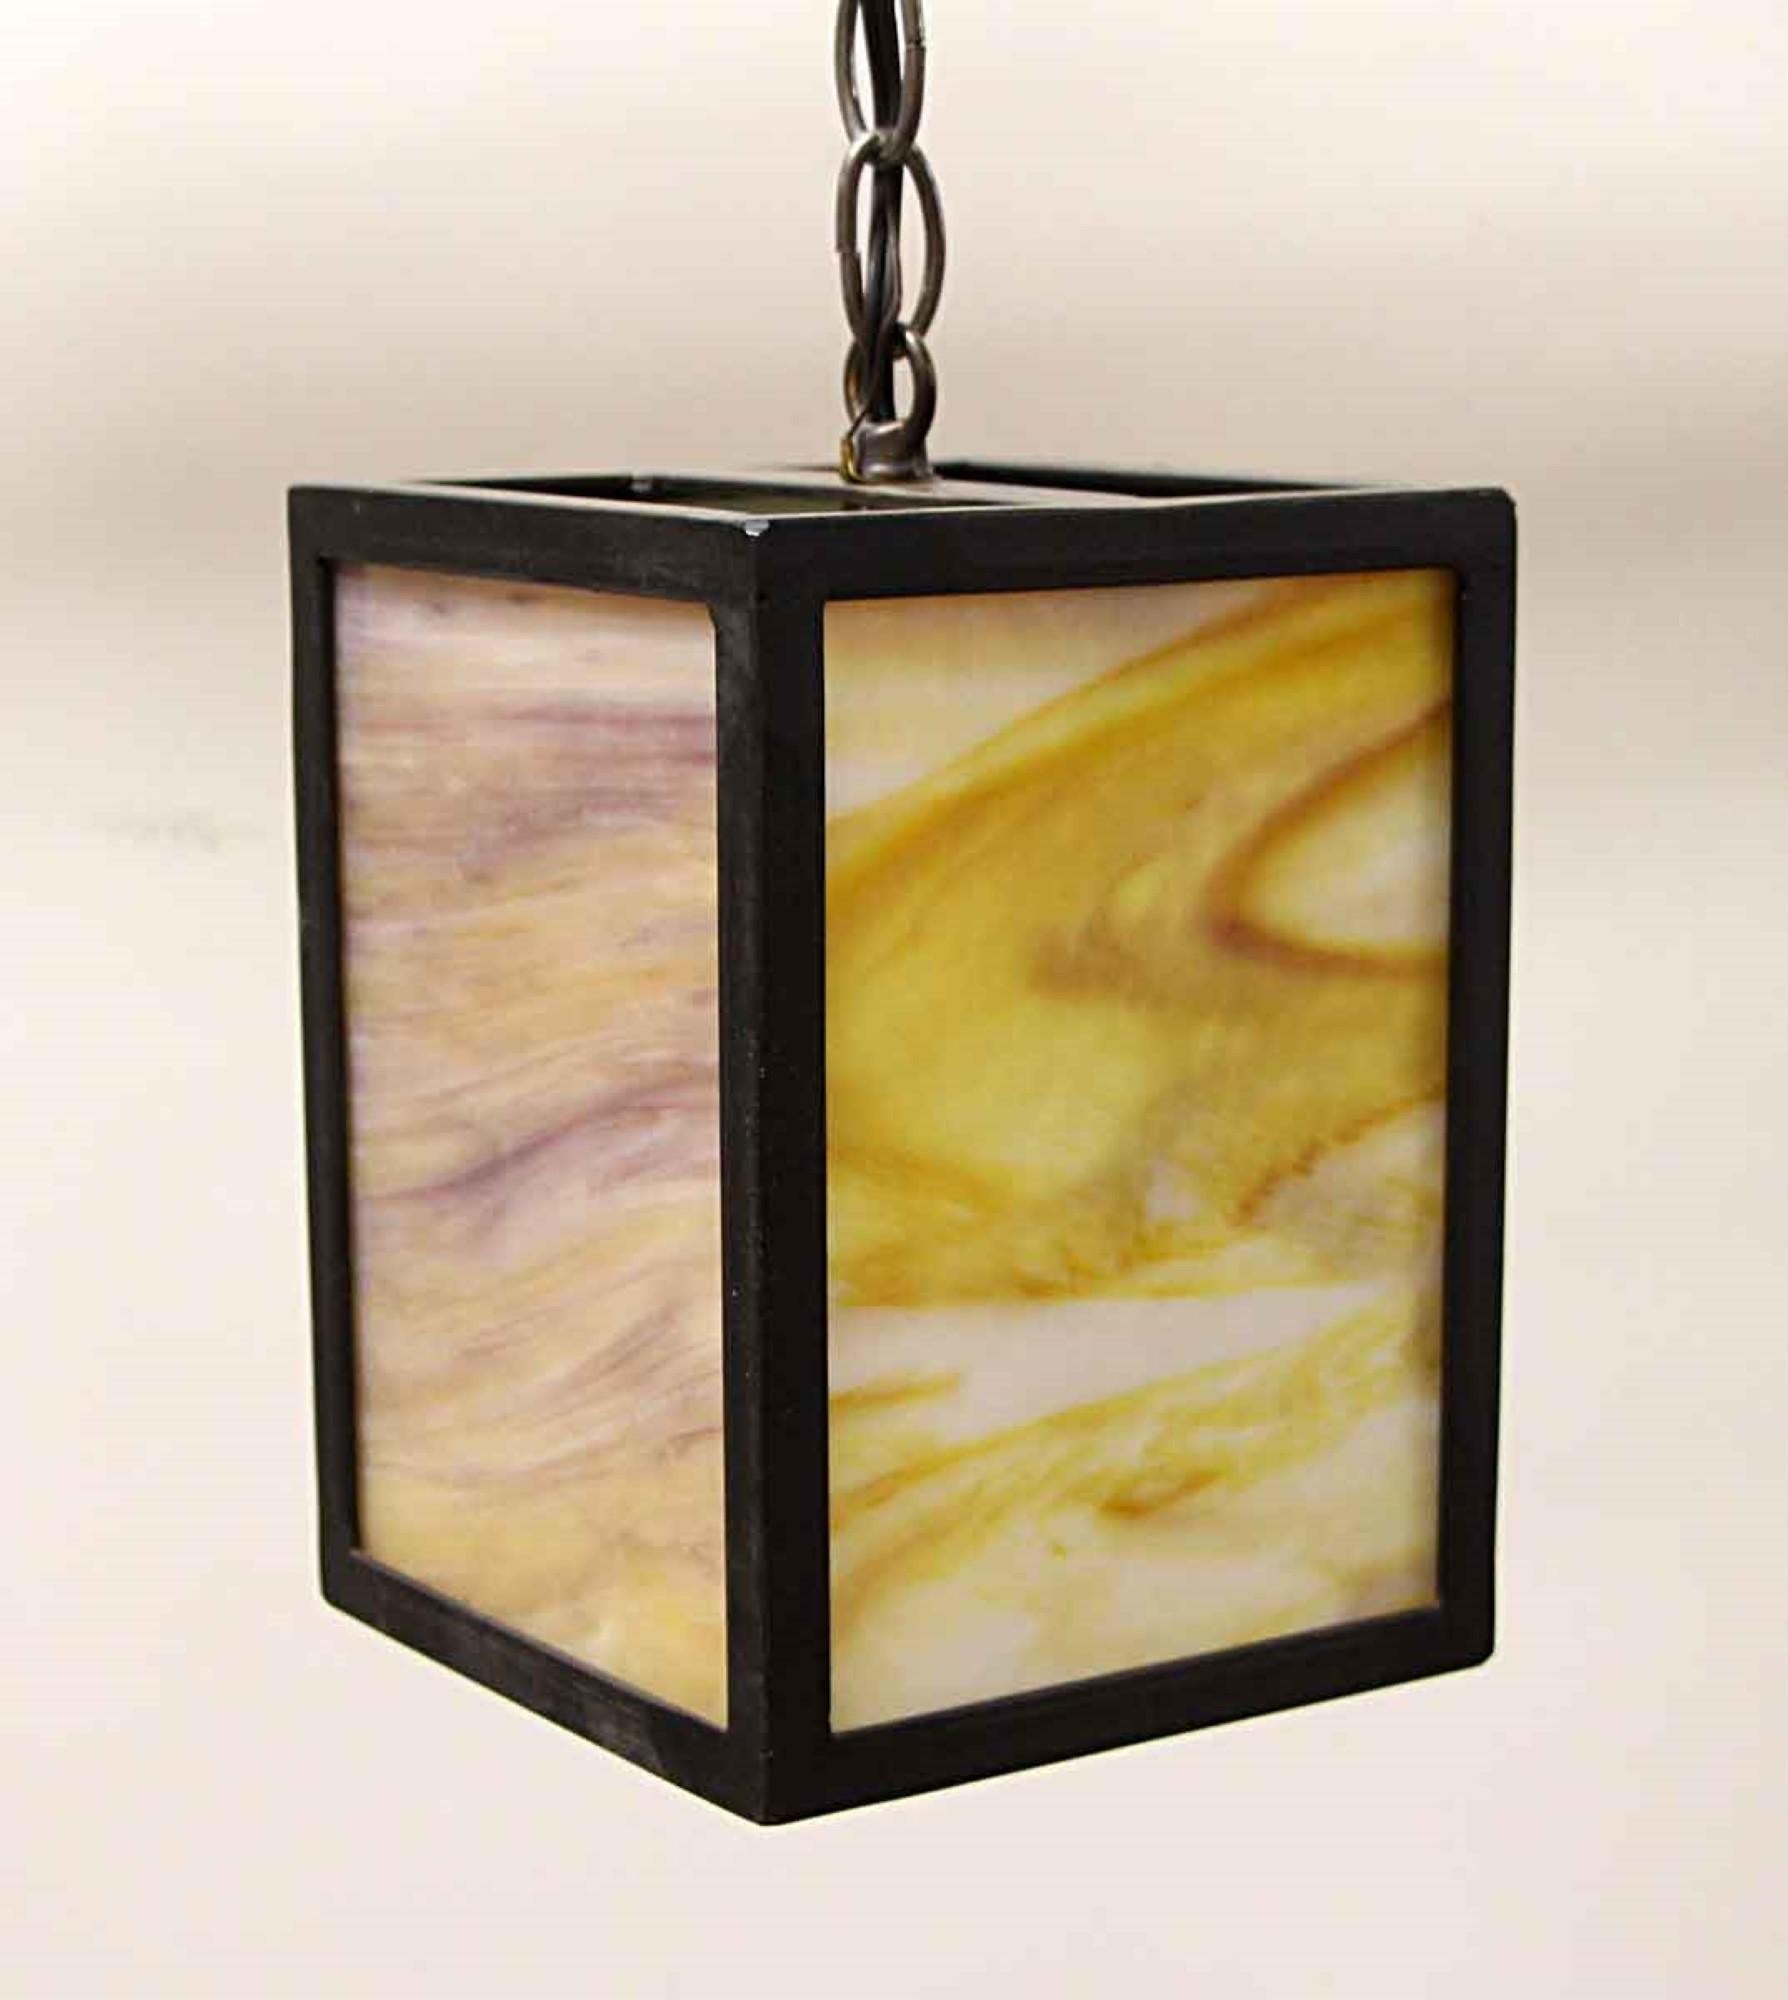 Prairie School style or Mid-Century Modern style iron framed pendant lantern from the 2010s with tan and amber slag stained glass and brass hardware. Cleaned and rewired. Please note, this item is located in our Los Angeles location.